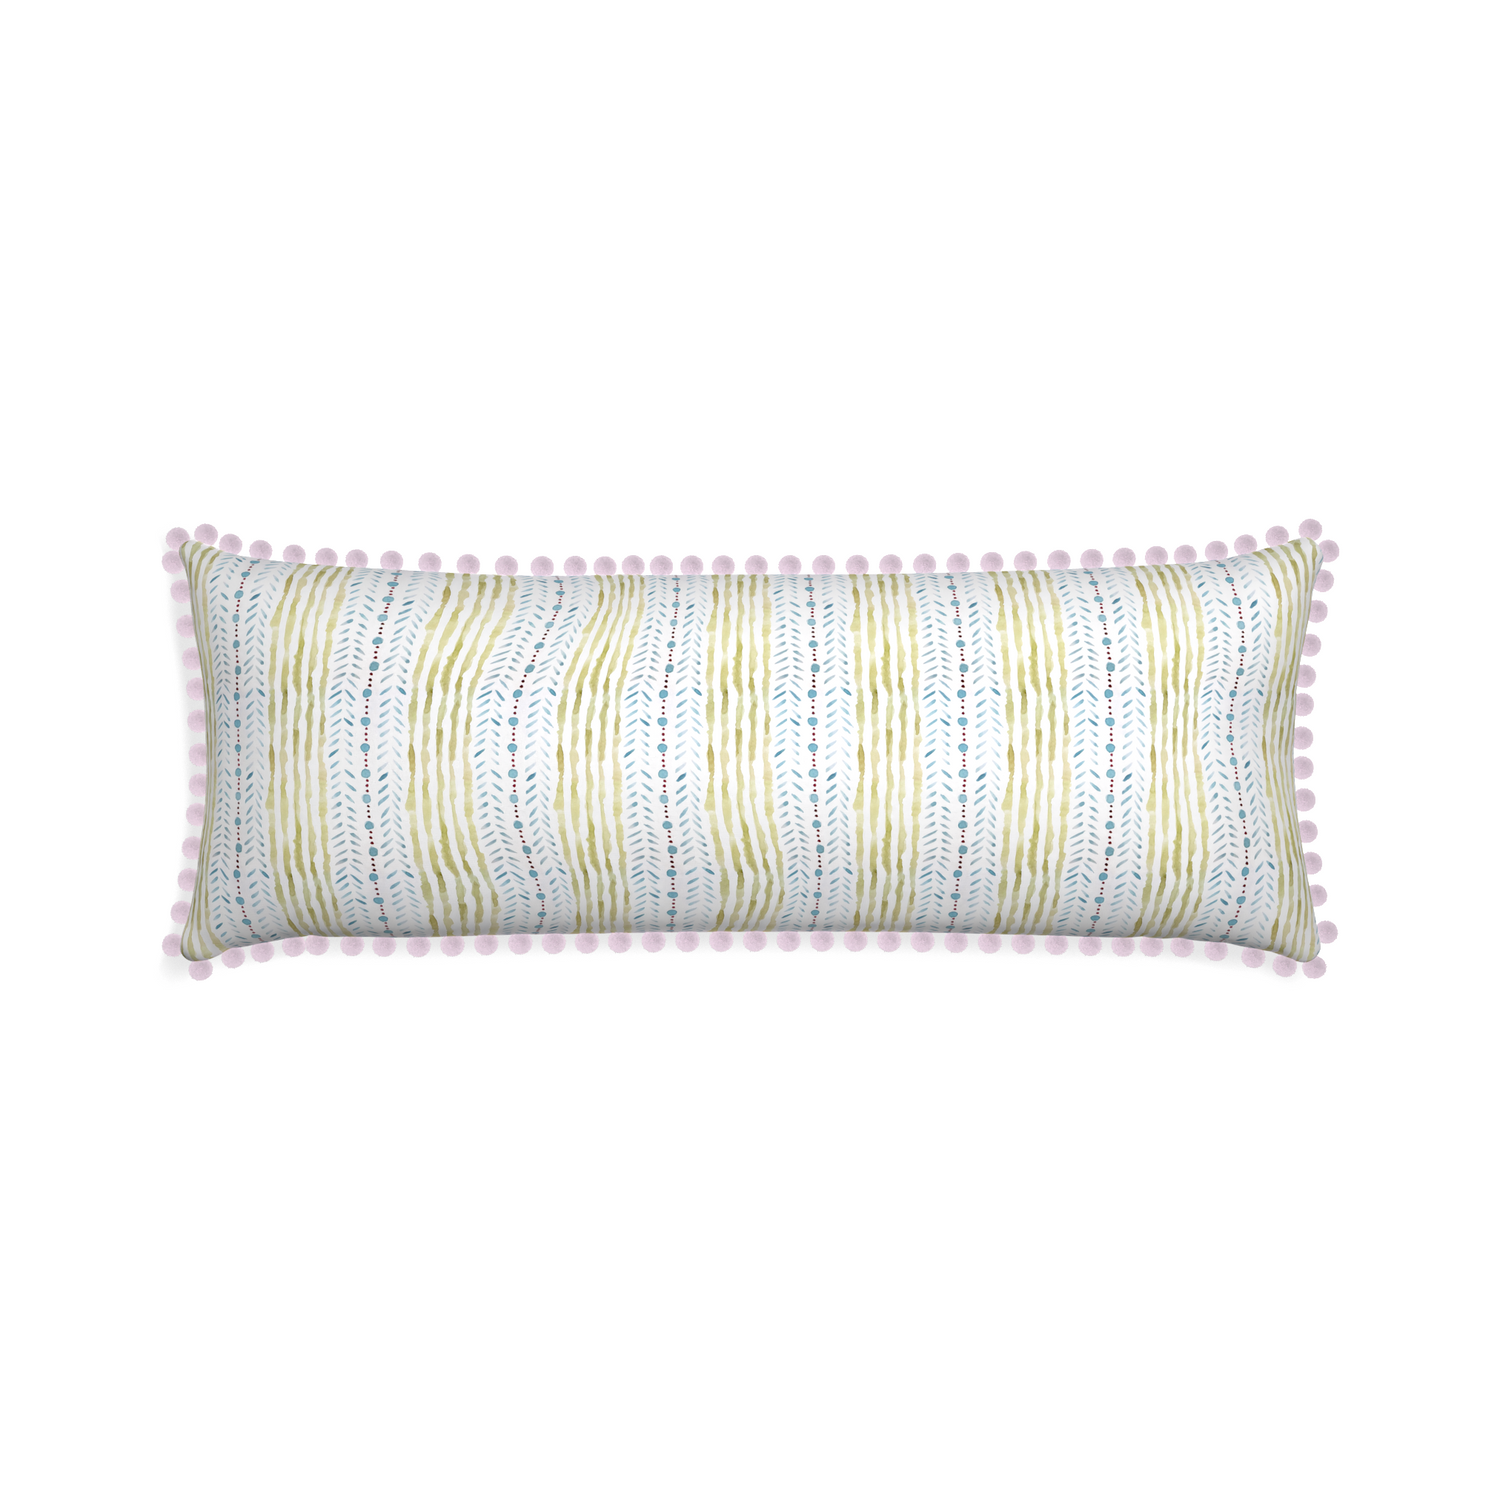 Xl-lumbar julia custom blue & green stripedpillow with l on white background